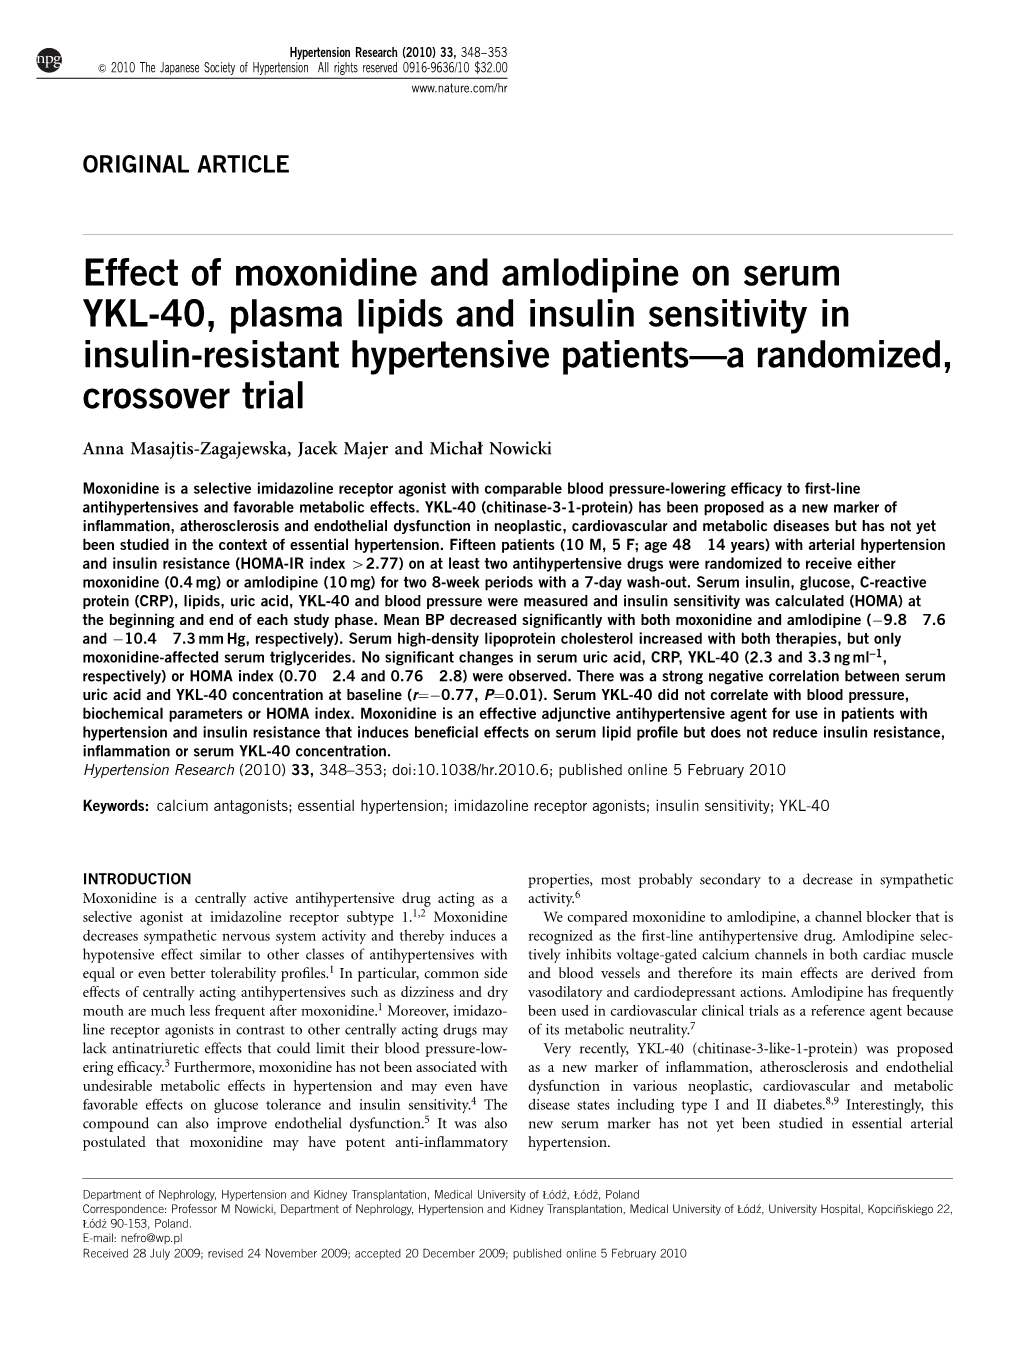 Effect of Moxonidine and Amlodipine on Serum YKL-40, Plasma Lipids and Insulin Sensitivity in Insulin-Resistant Hypertensive Patients—A Randomized, Crossover Trial